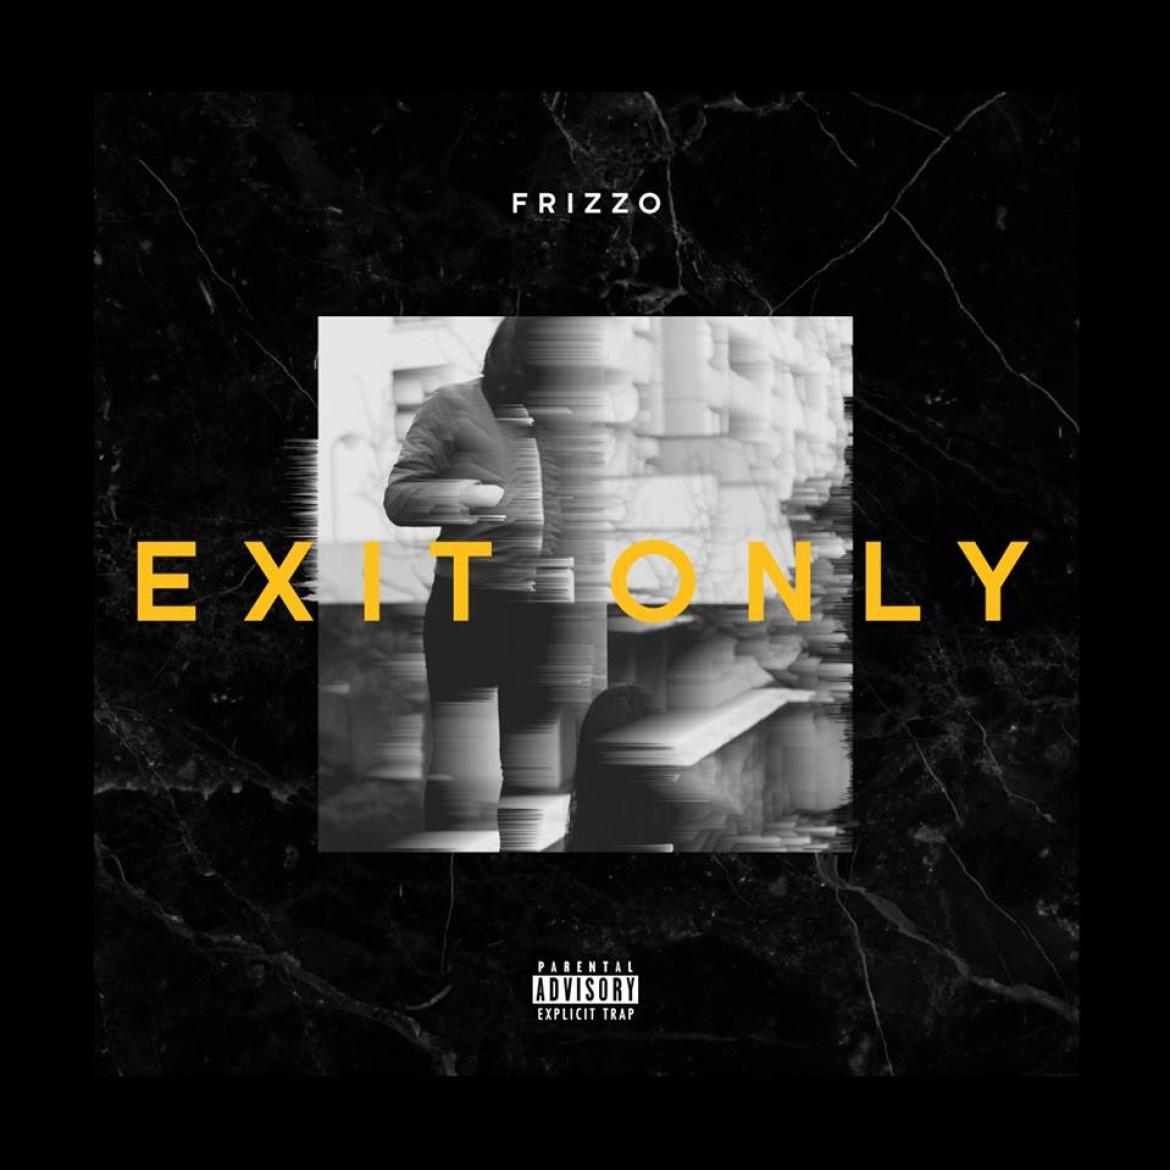 Frizzo - Exit only